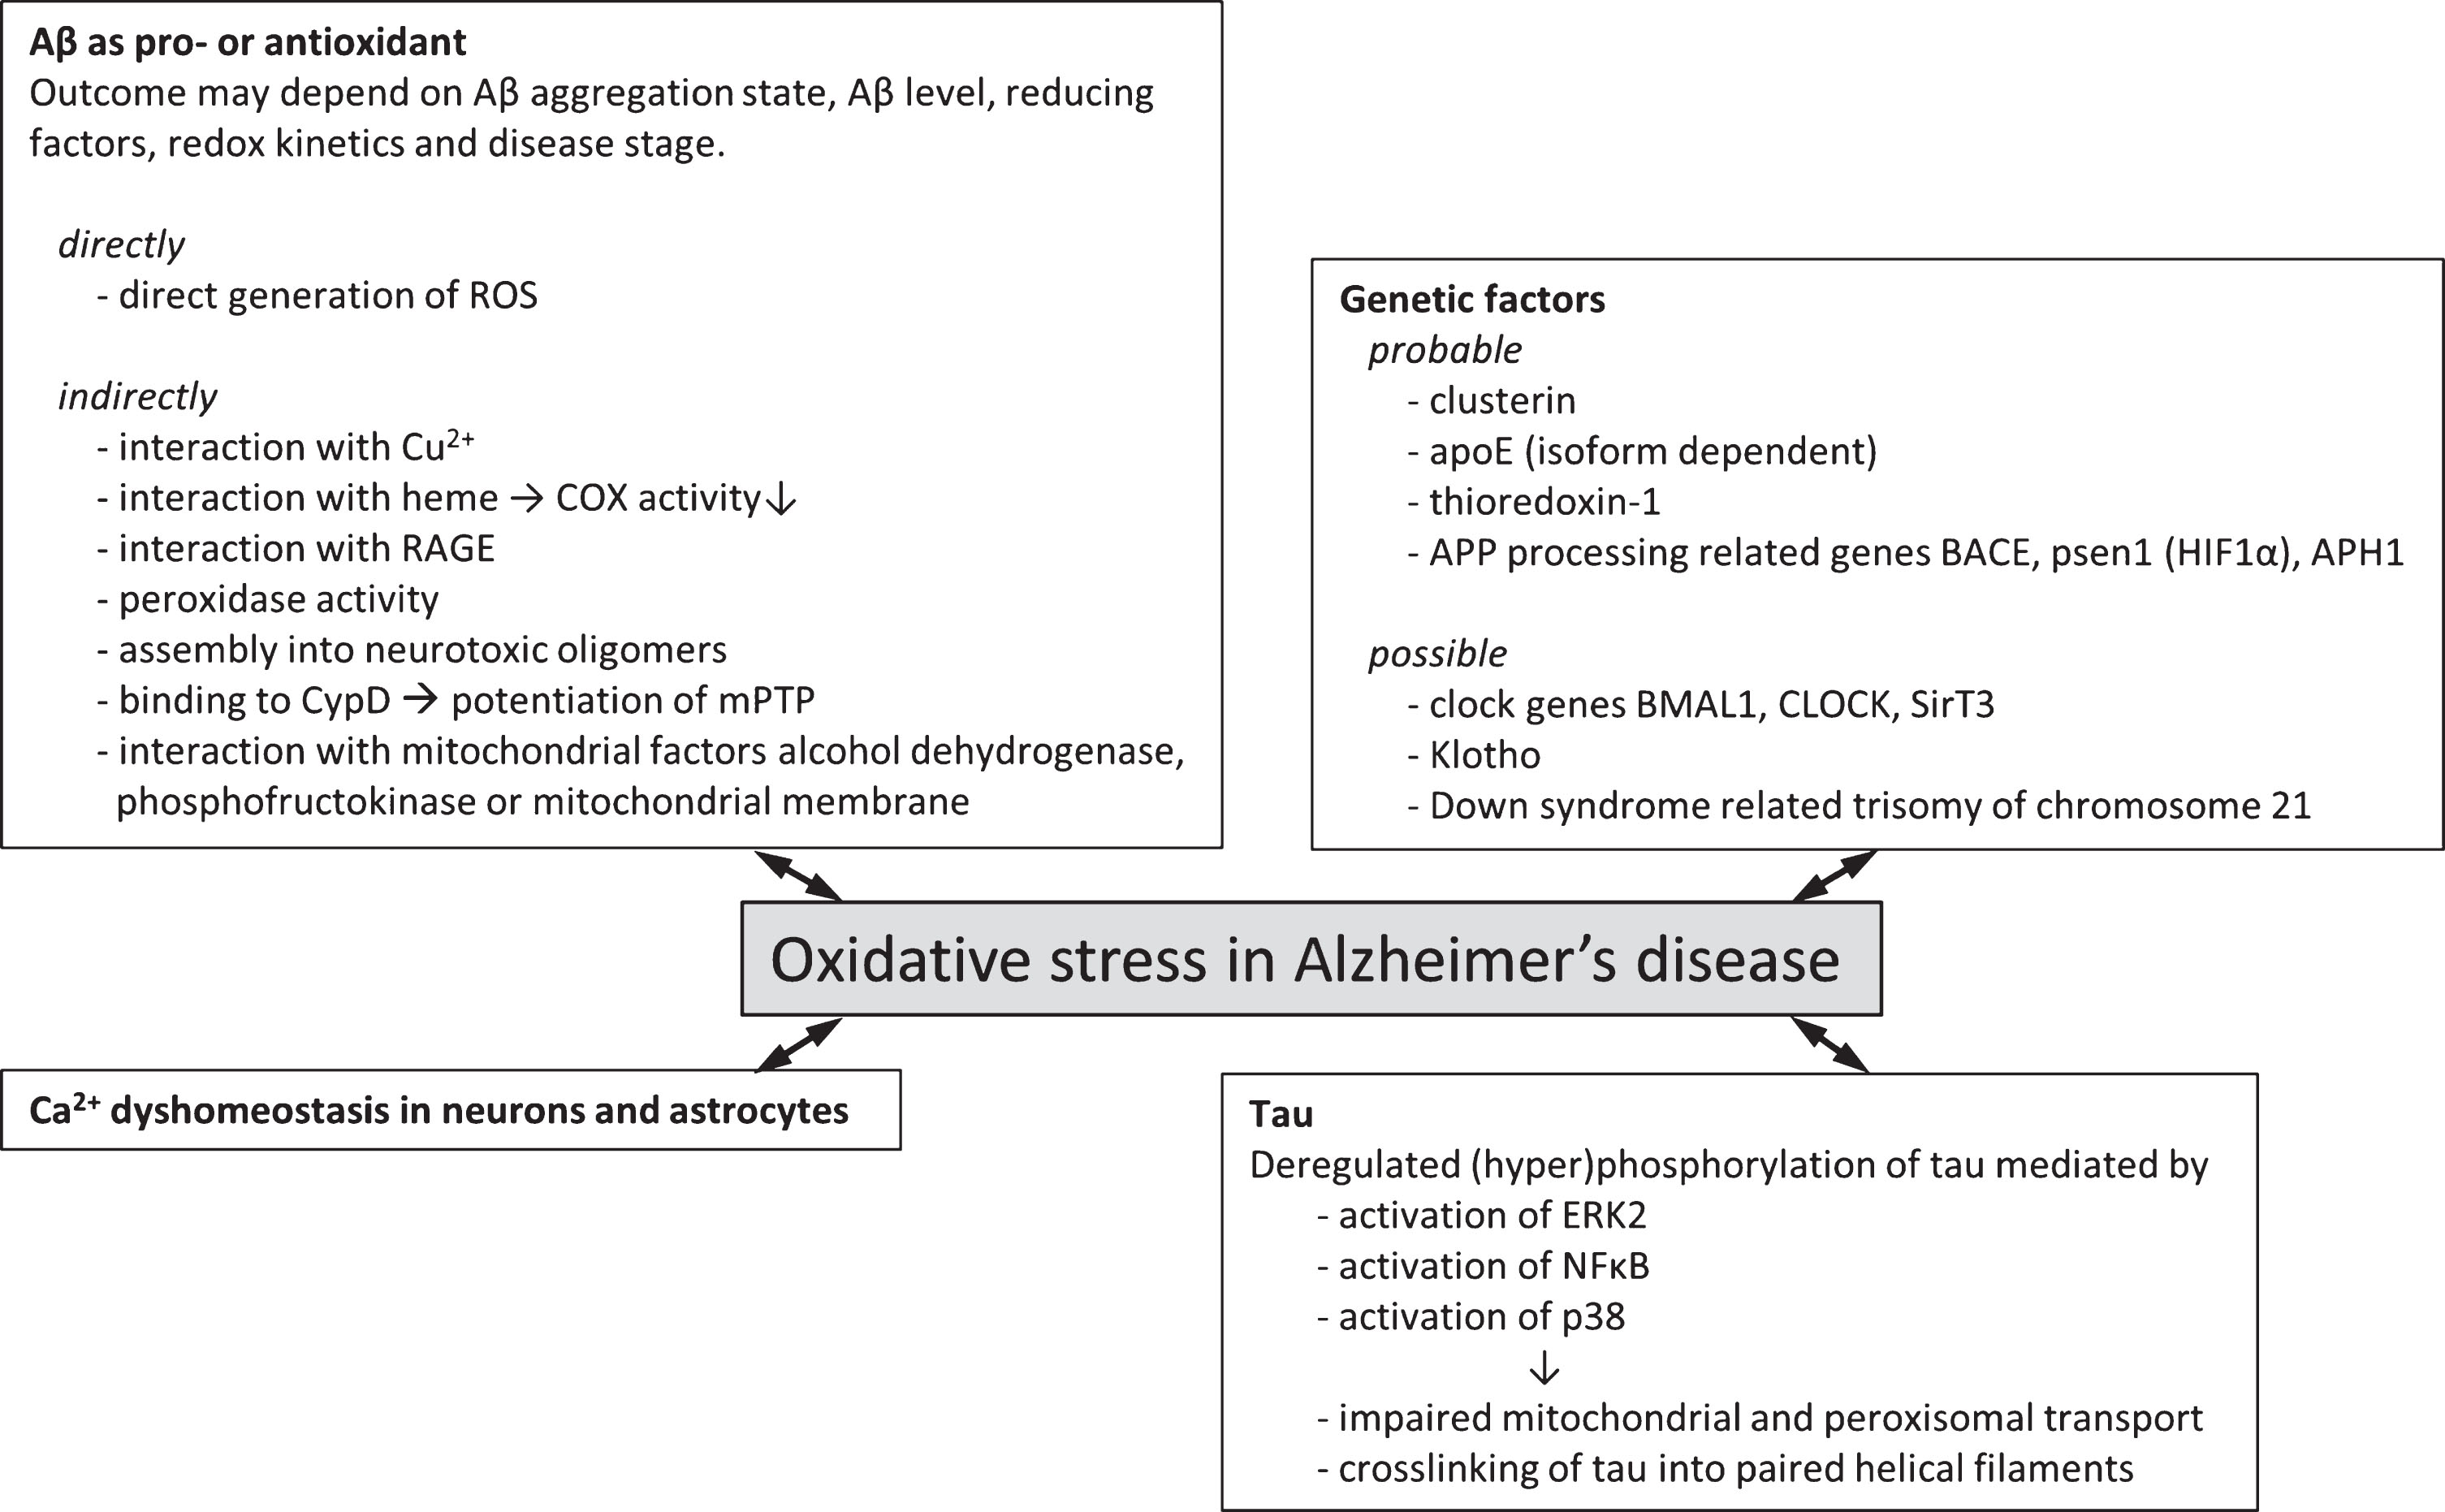 Genetic factors and molecular mechanisms of oxidative stress in Alzheimer’s disease. Overview of probable (experimental evidence available in literature) and possible (no direct experimental evidence available) genetic factors that associate oxidative stress with Alzheimer’s disease. Various molecular mechanisms by which oxidative stress and Alzheimer’s disease may be associated have been described. These often involve the two hallmark proteins Aβ and tau and effects may be directly involving the generation of ROS or indirectly via interaction with various cellular factors giving rise to increased ROS generation or lowered endogenous antioxidant capacity.